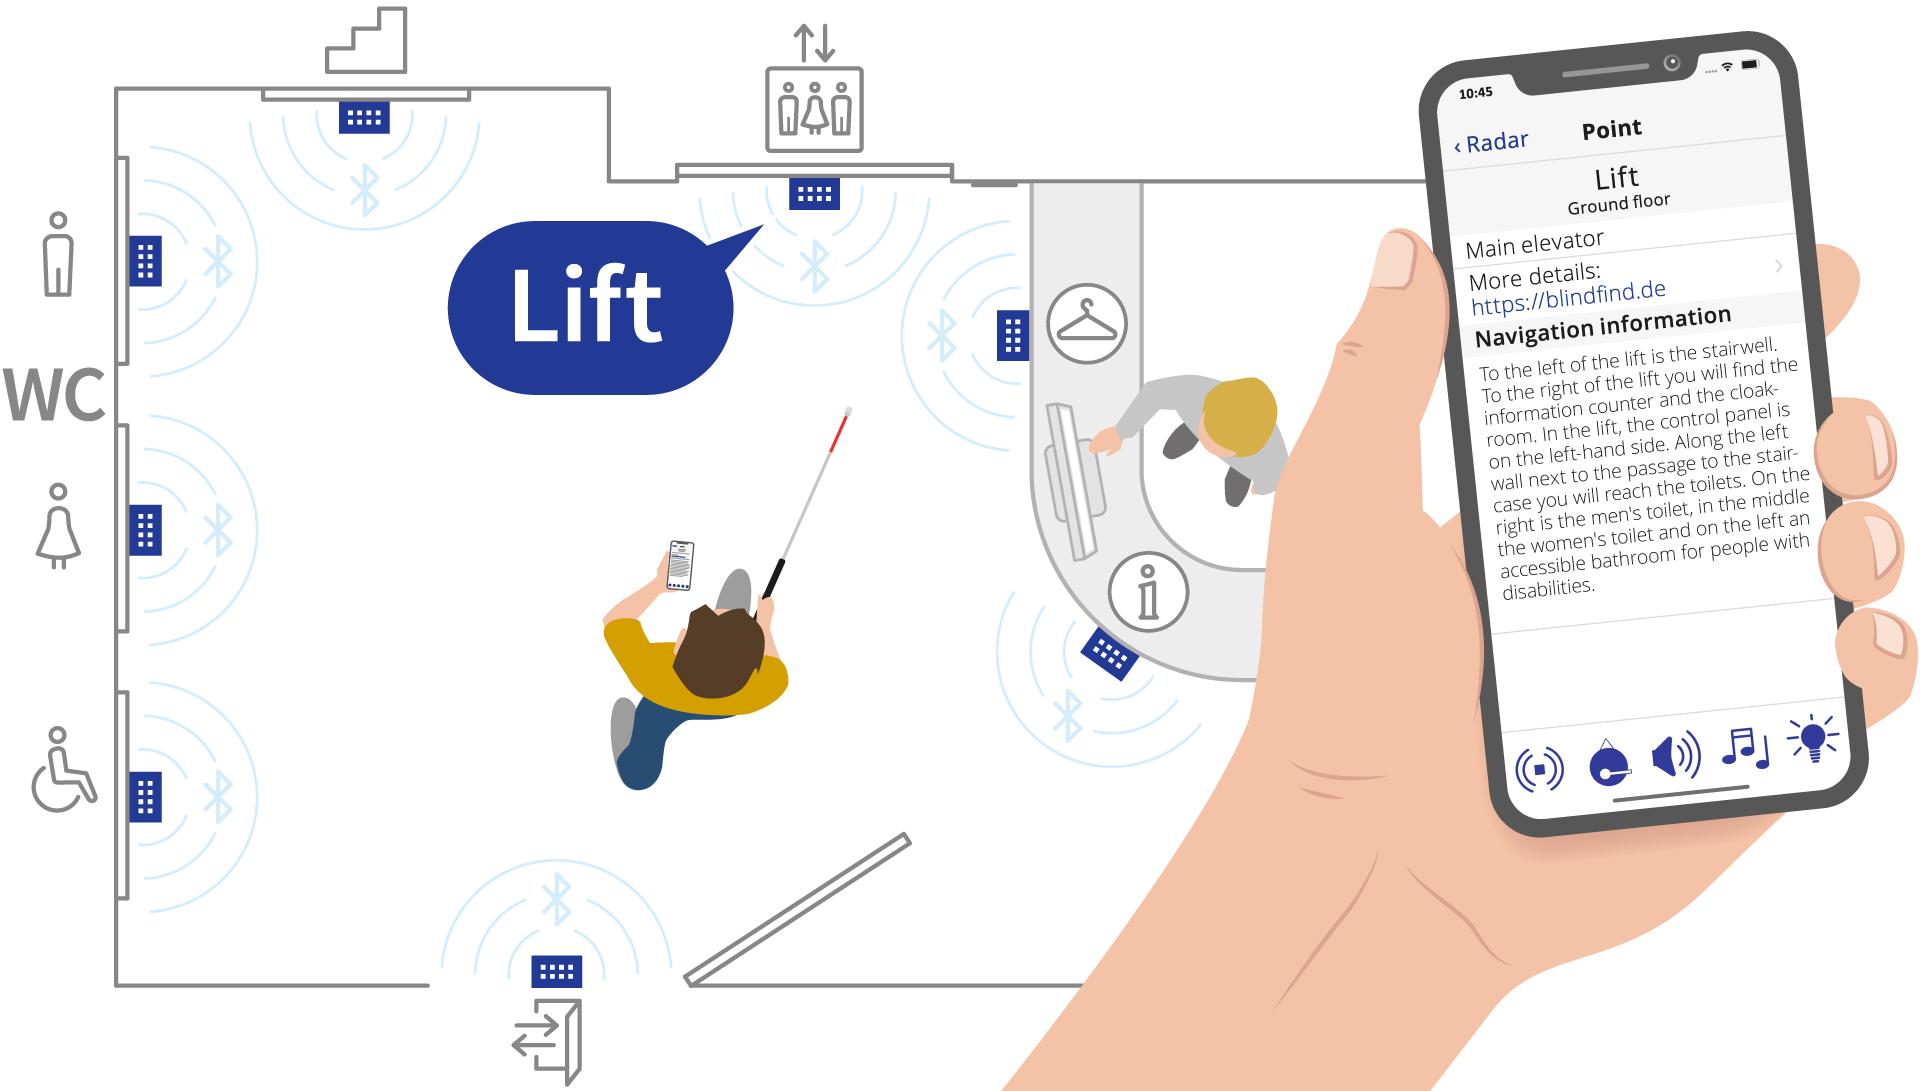 Sketch of the same interior space as shown in the two images above. As the man has selected “lift” as his destination, a speech bubble is shown near the blindFind box installed above the lift doors. It says “lift”, prompting the man to walk towards the lift. The smartphone is displaying additional information about the lift. This includes more detailed information about the selected destination, its location, and information about adjacent rooms or corridors and how to reach them from the selected location.